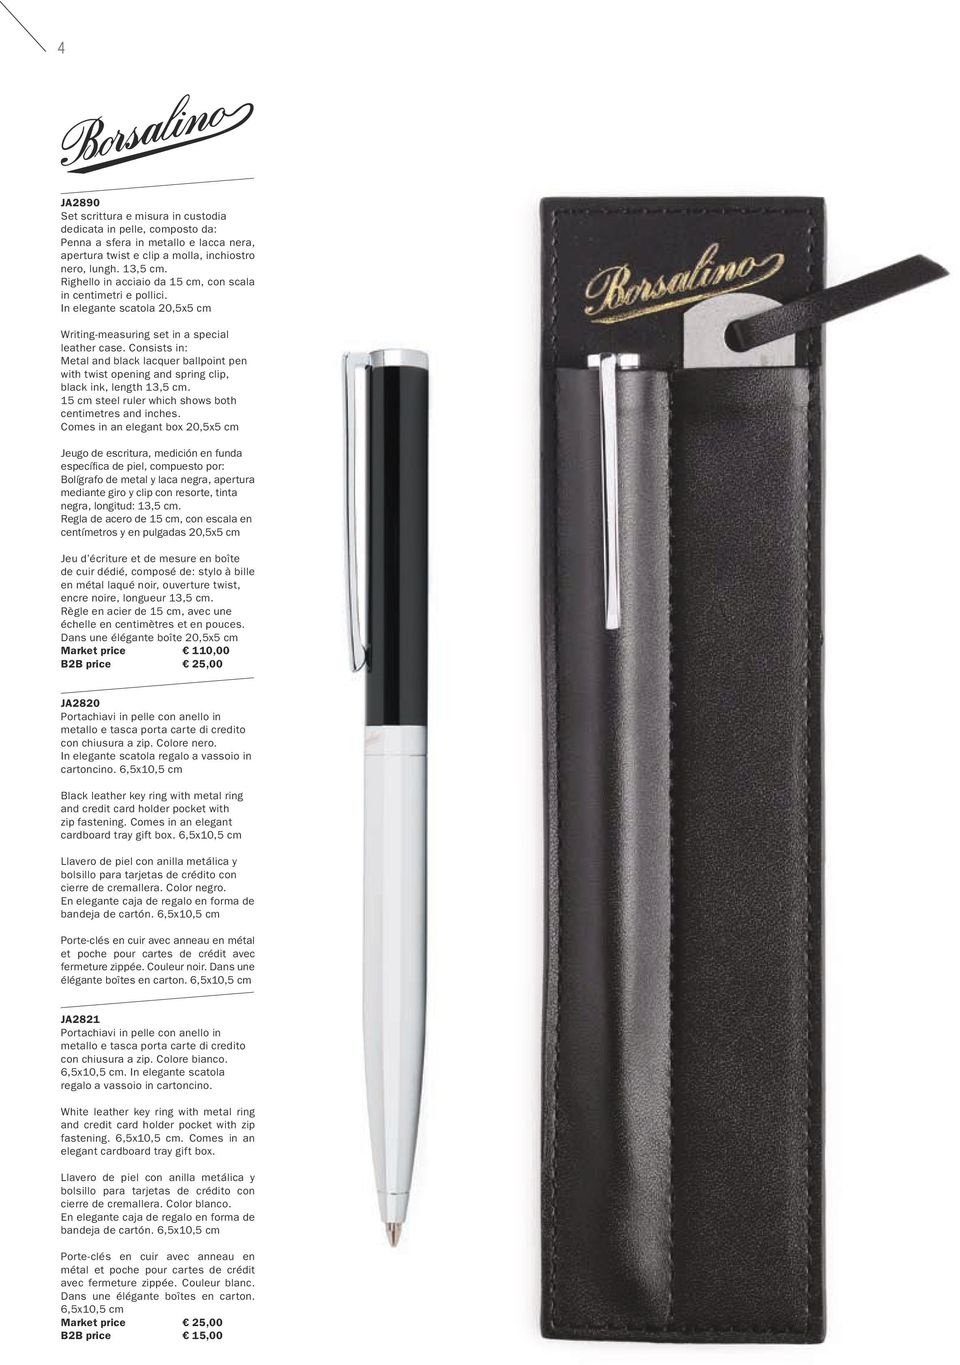 Consists in: Metal and black lacquer ballpoint pen with twist opening and spring clip, black ink, length 13,5 cm. 15 cm steel ruler which shows both centimetres and inches.